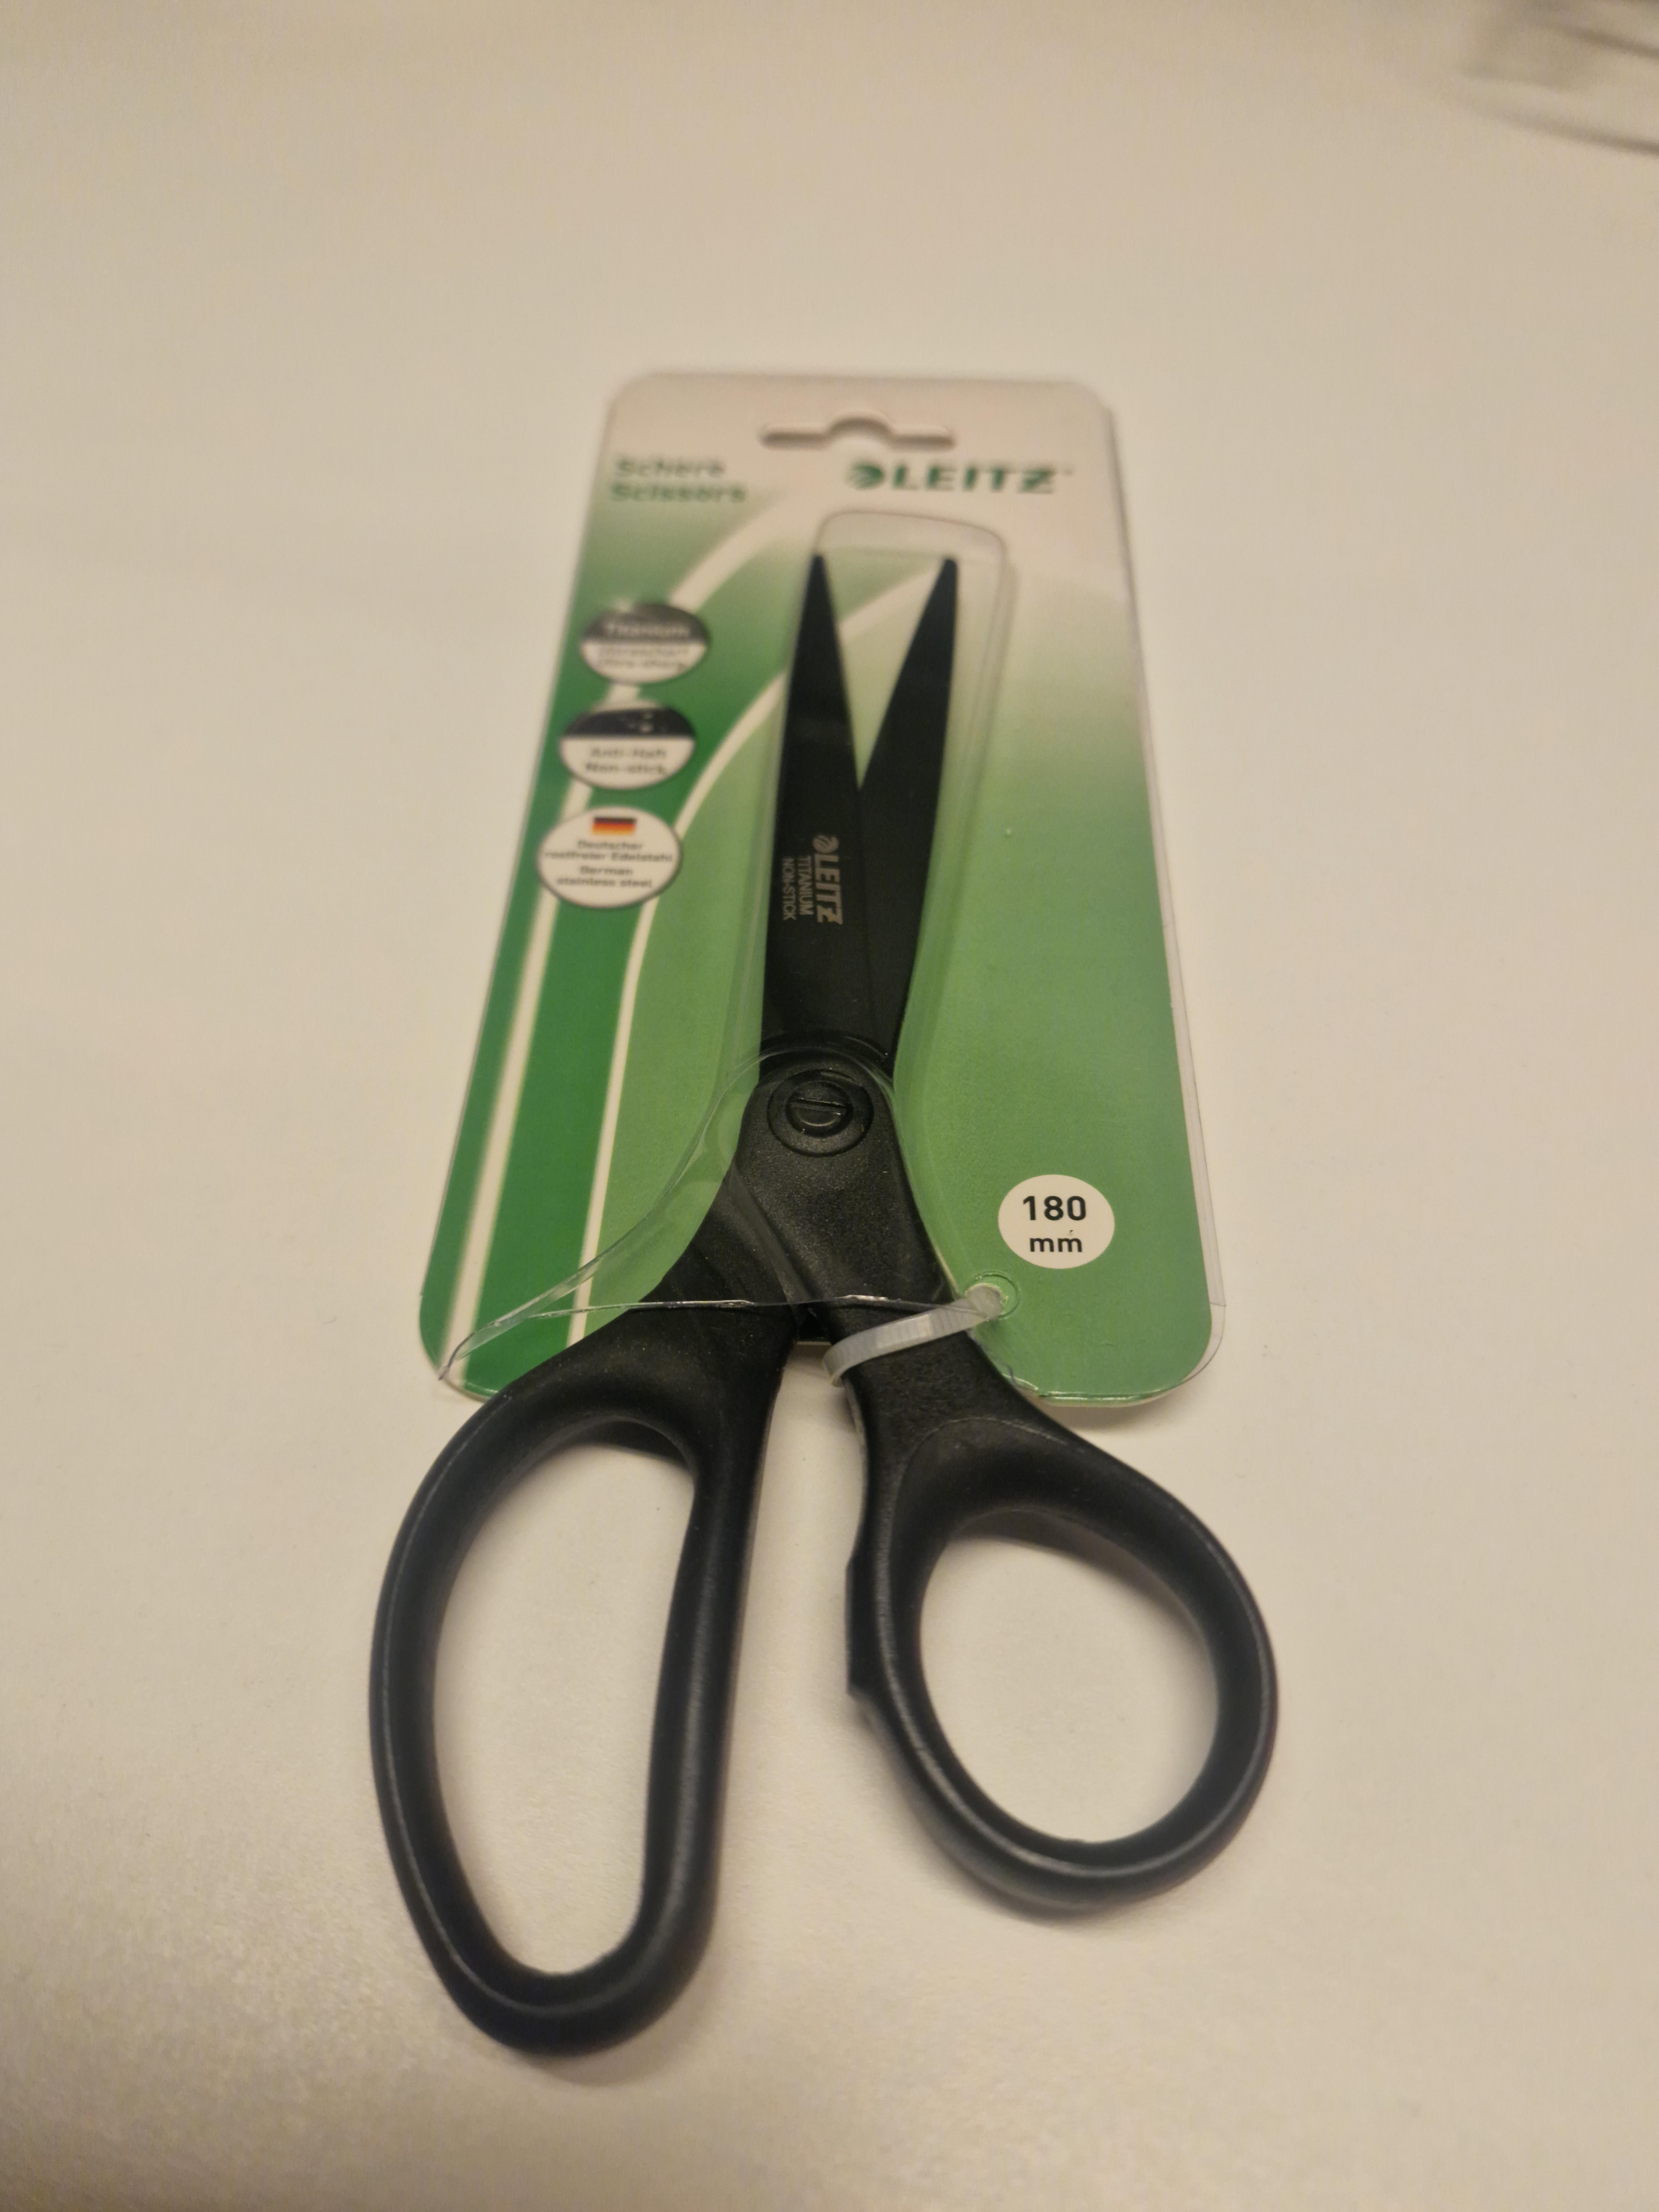 A pair of scissors packaged in such a way that you&#x27;ll need another pair to open it